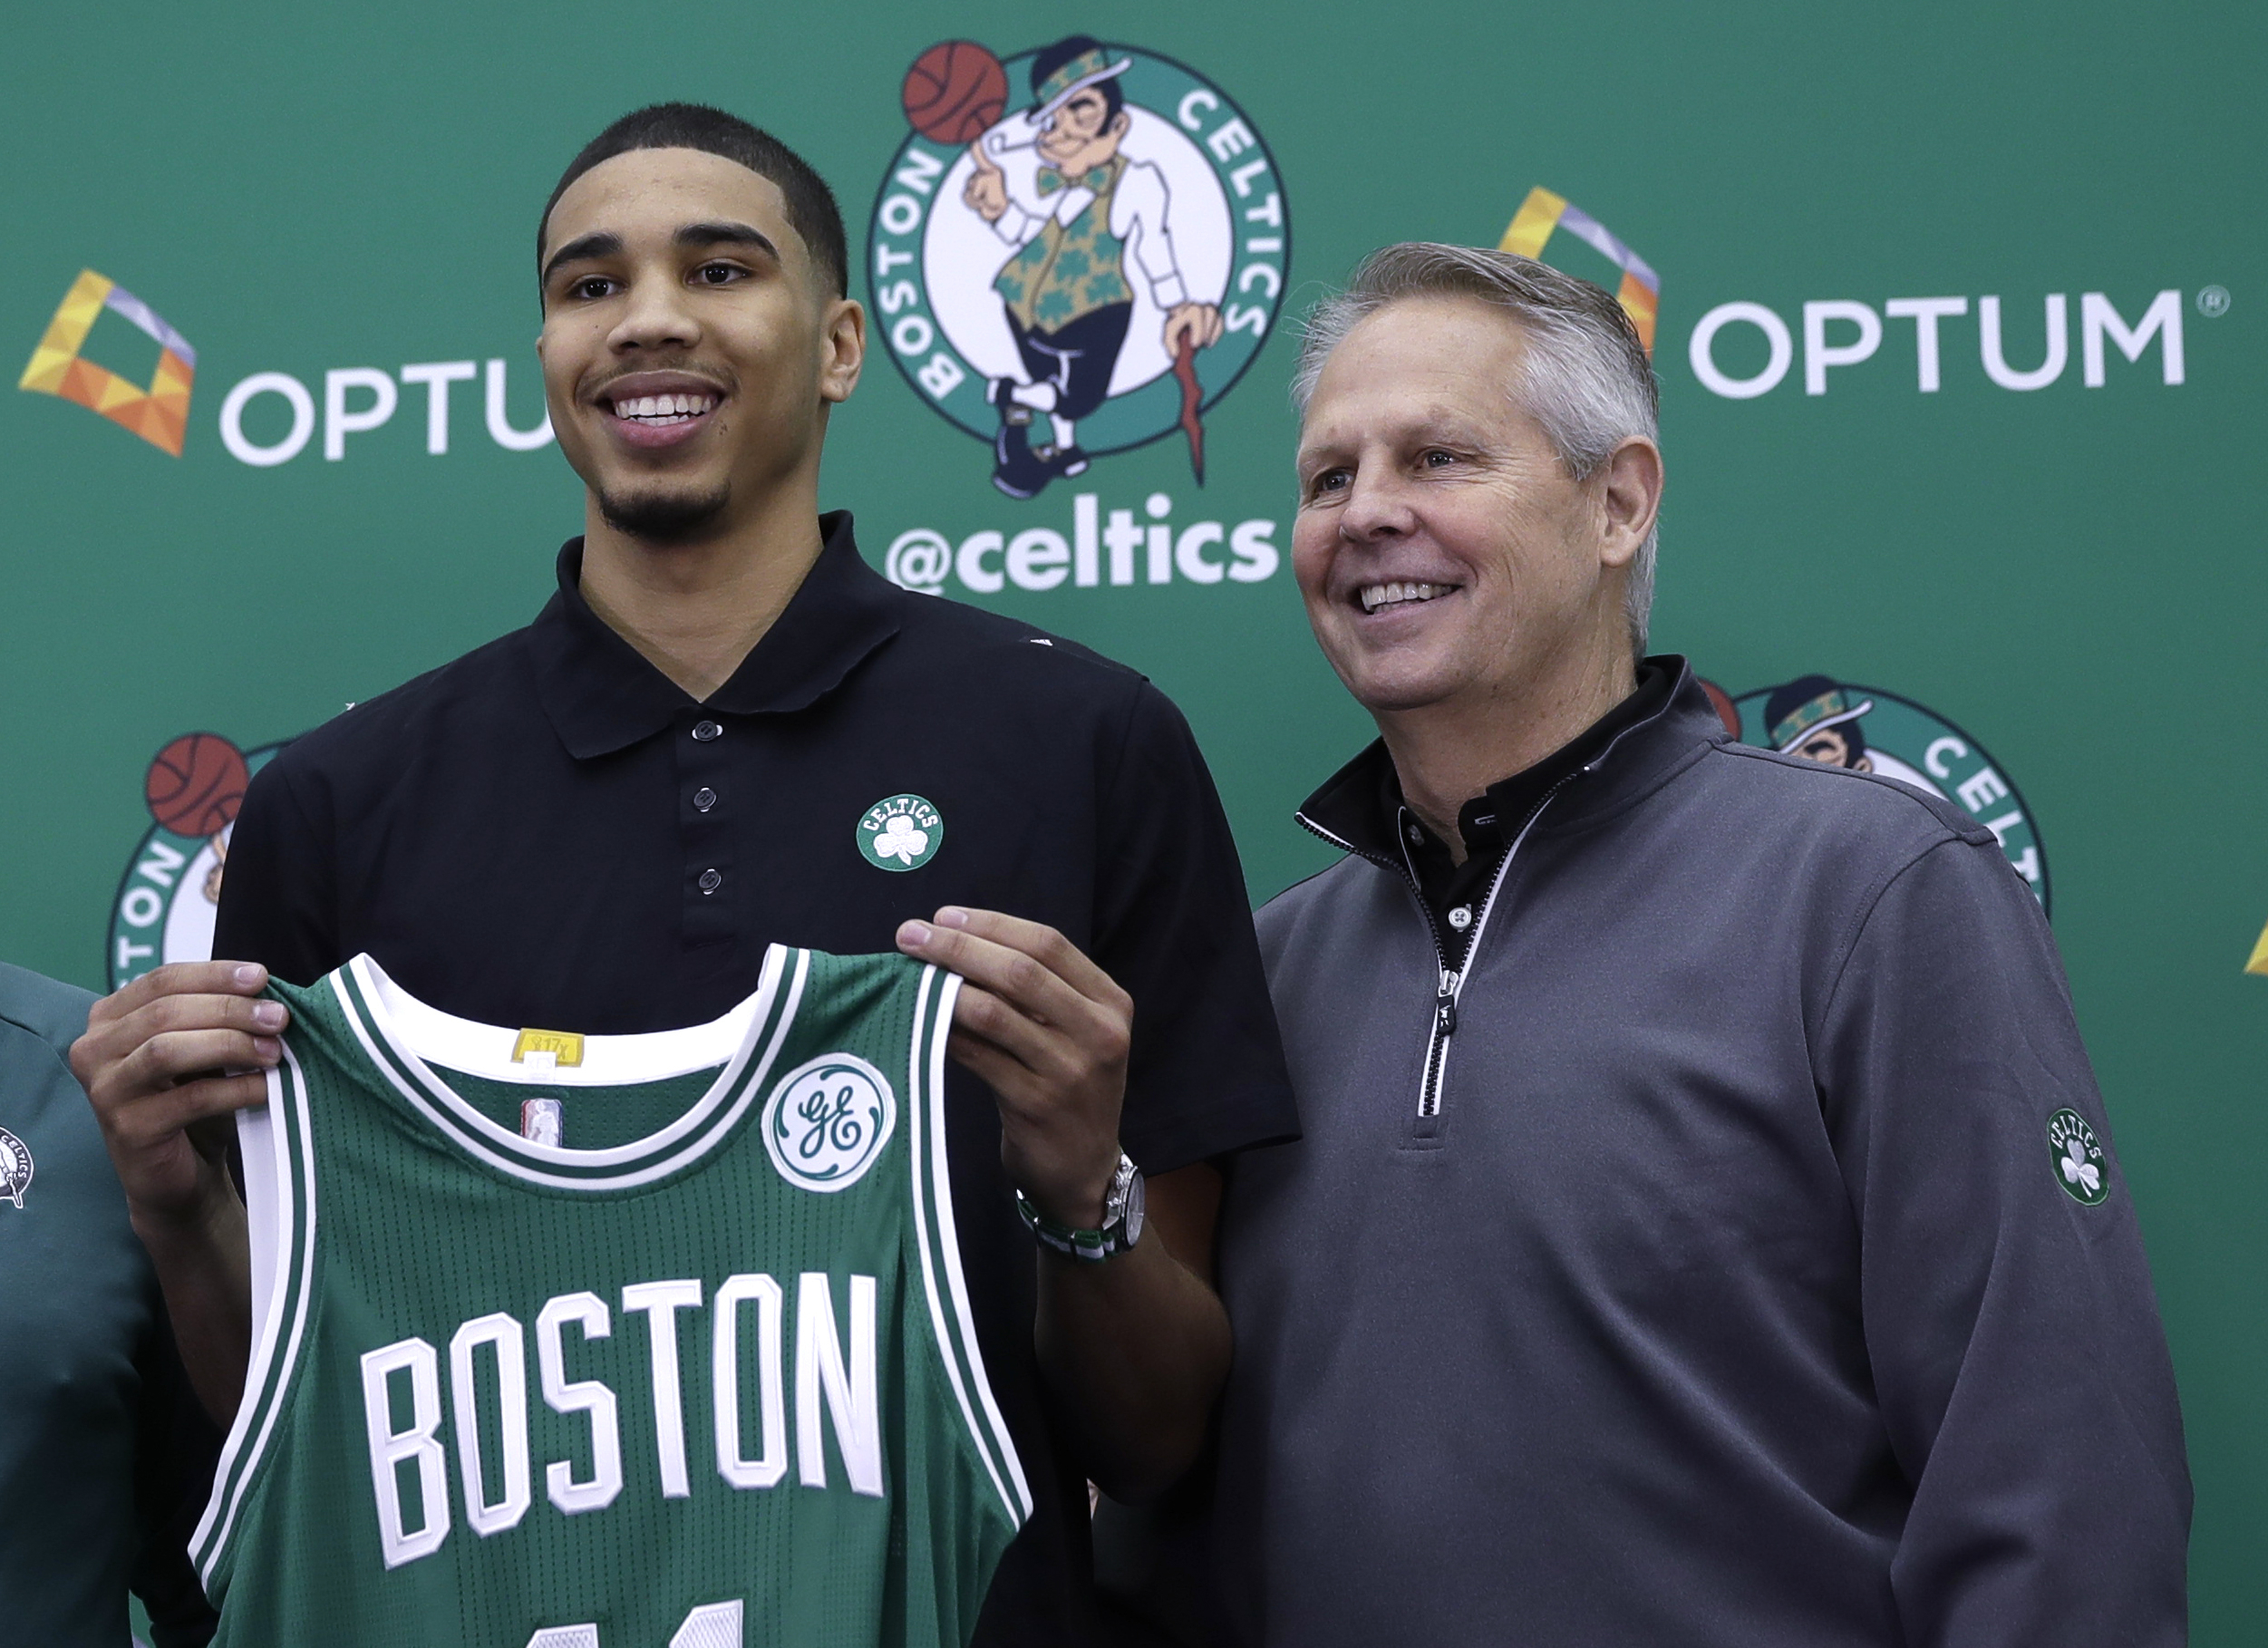 Utah Jazz Name Danny Ainge Alternate Governor, CEO of Basketball Operations  - Sports Illustrated Boston Celtics News, Analysis and More